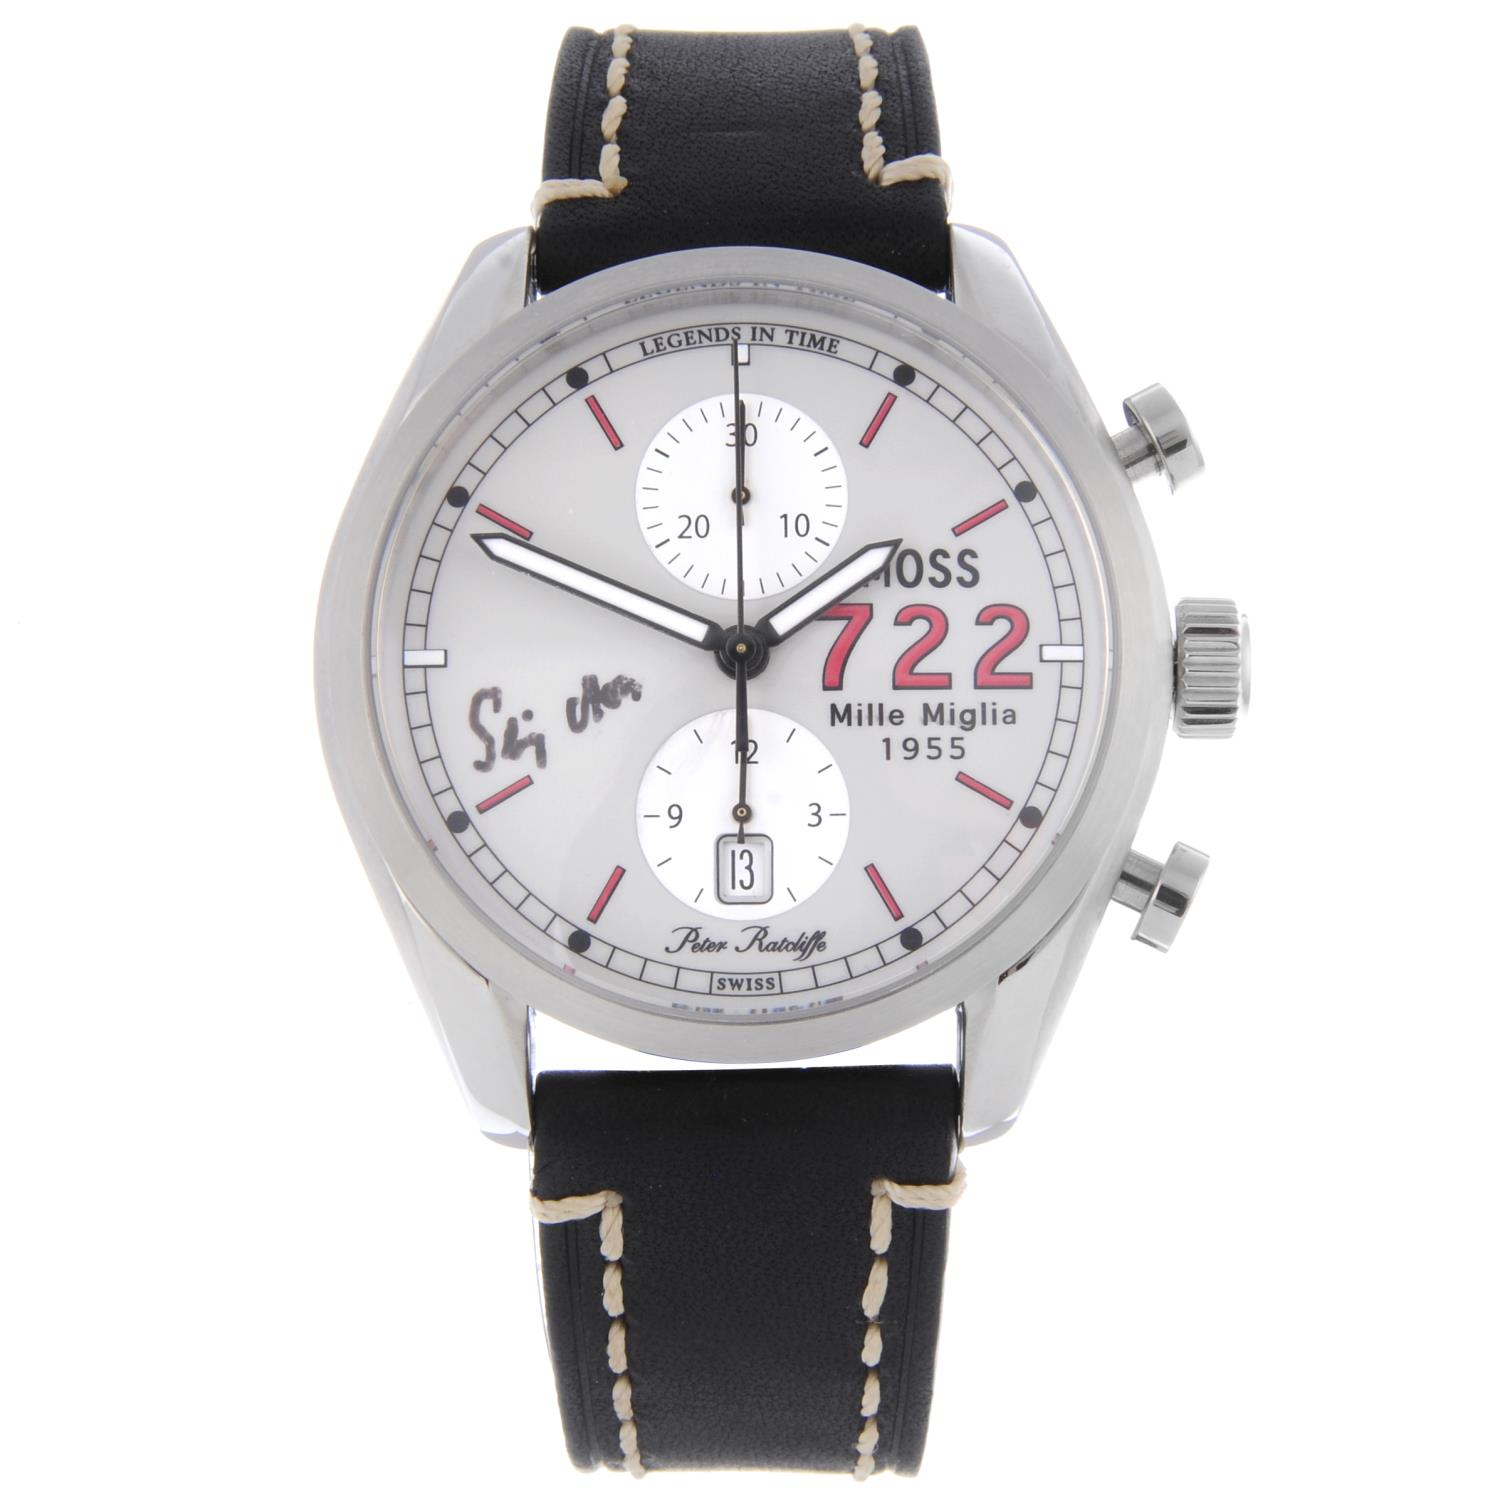 PETER RATCLIFFE - a limited edition gentleman's Stirling Moss 722 Mille Miglia 1955 chronograph